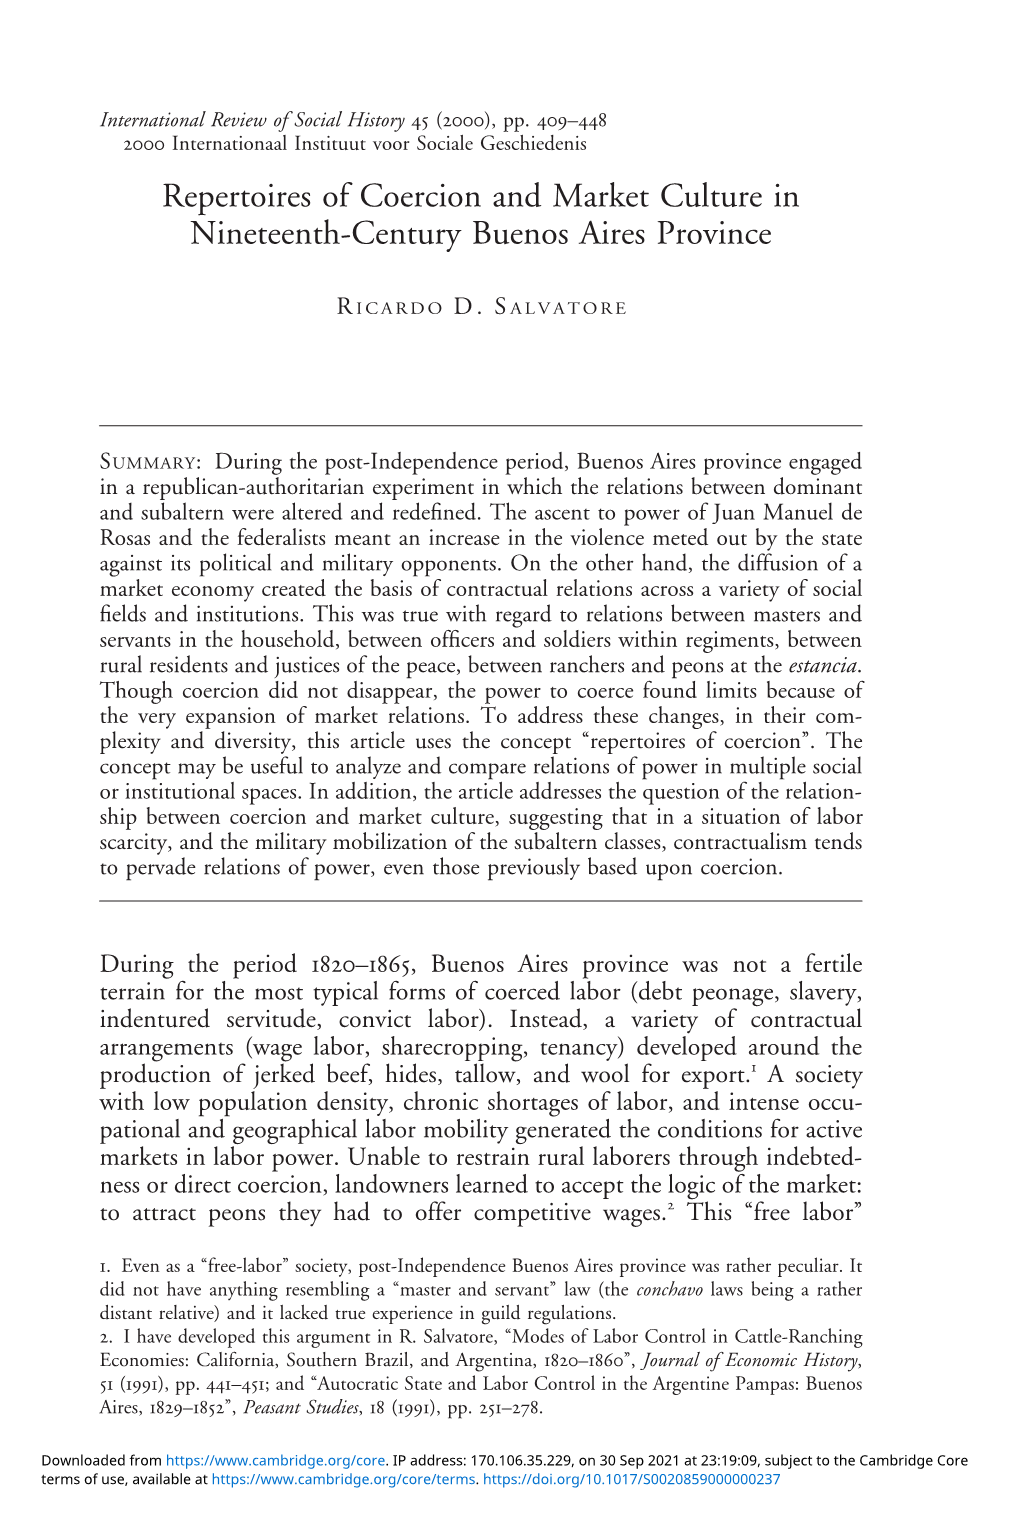 Repertoires of Coercion and Market Culture in Nineteenth-Century Buenos Aires Province